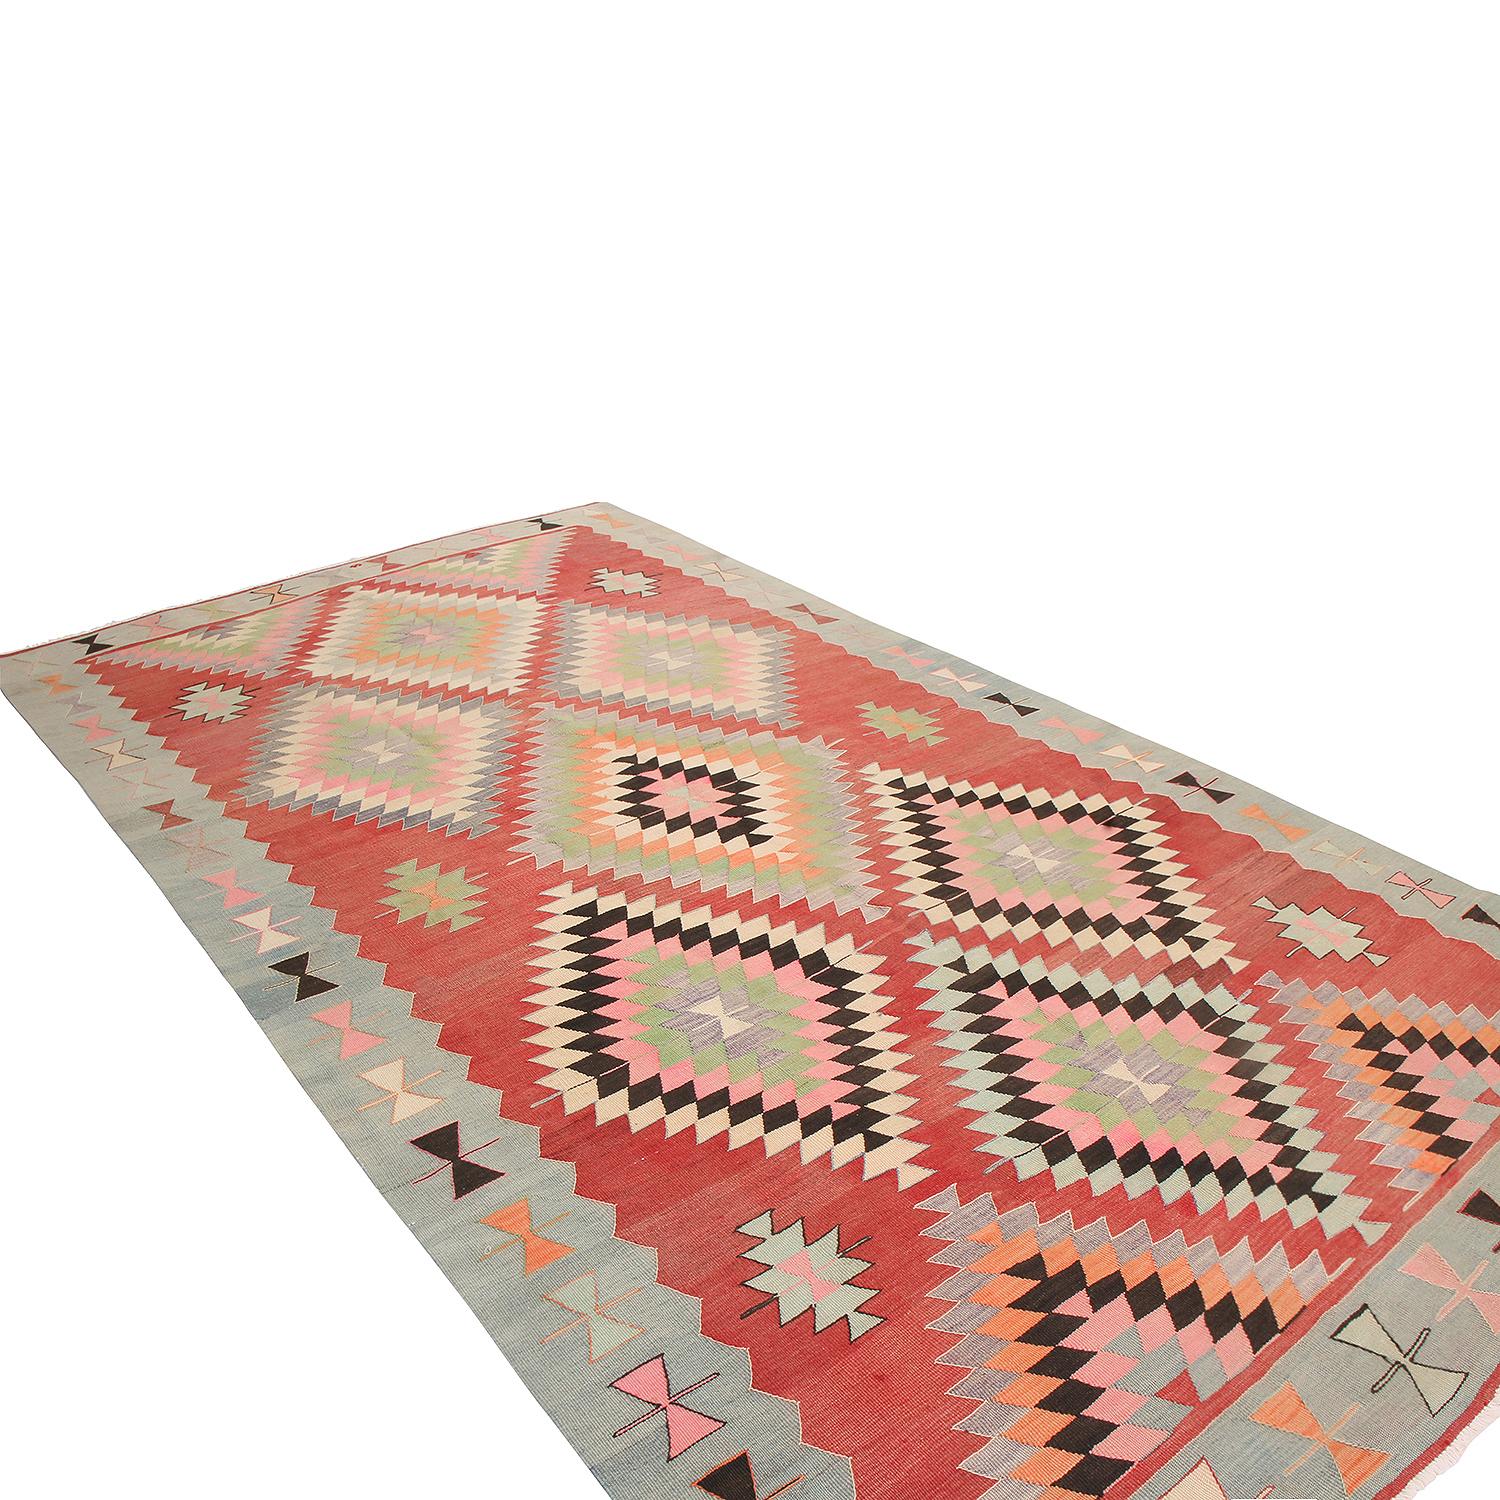 Flat-woven by hand in high-quality wool originating from Turkey between 1940-1950, this vintage Kilim rug enjoys a rare teal border background and complementary red field background, both tastefully abrashed and accented by the rare pagination of